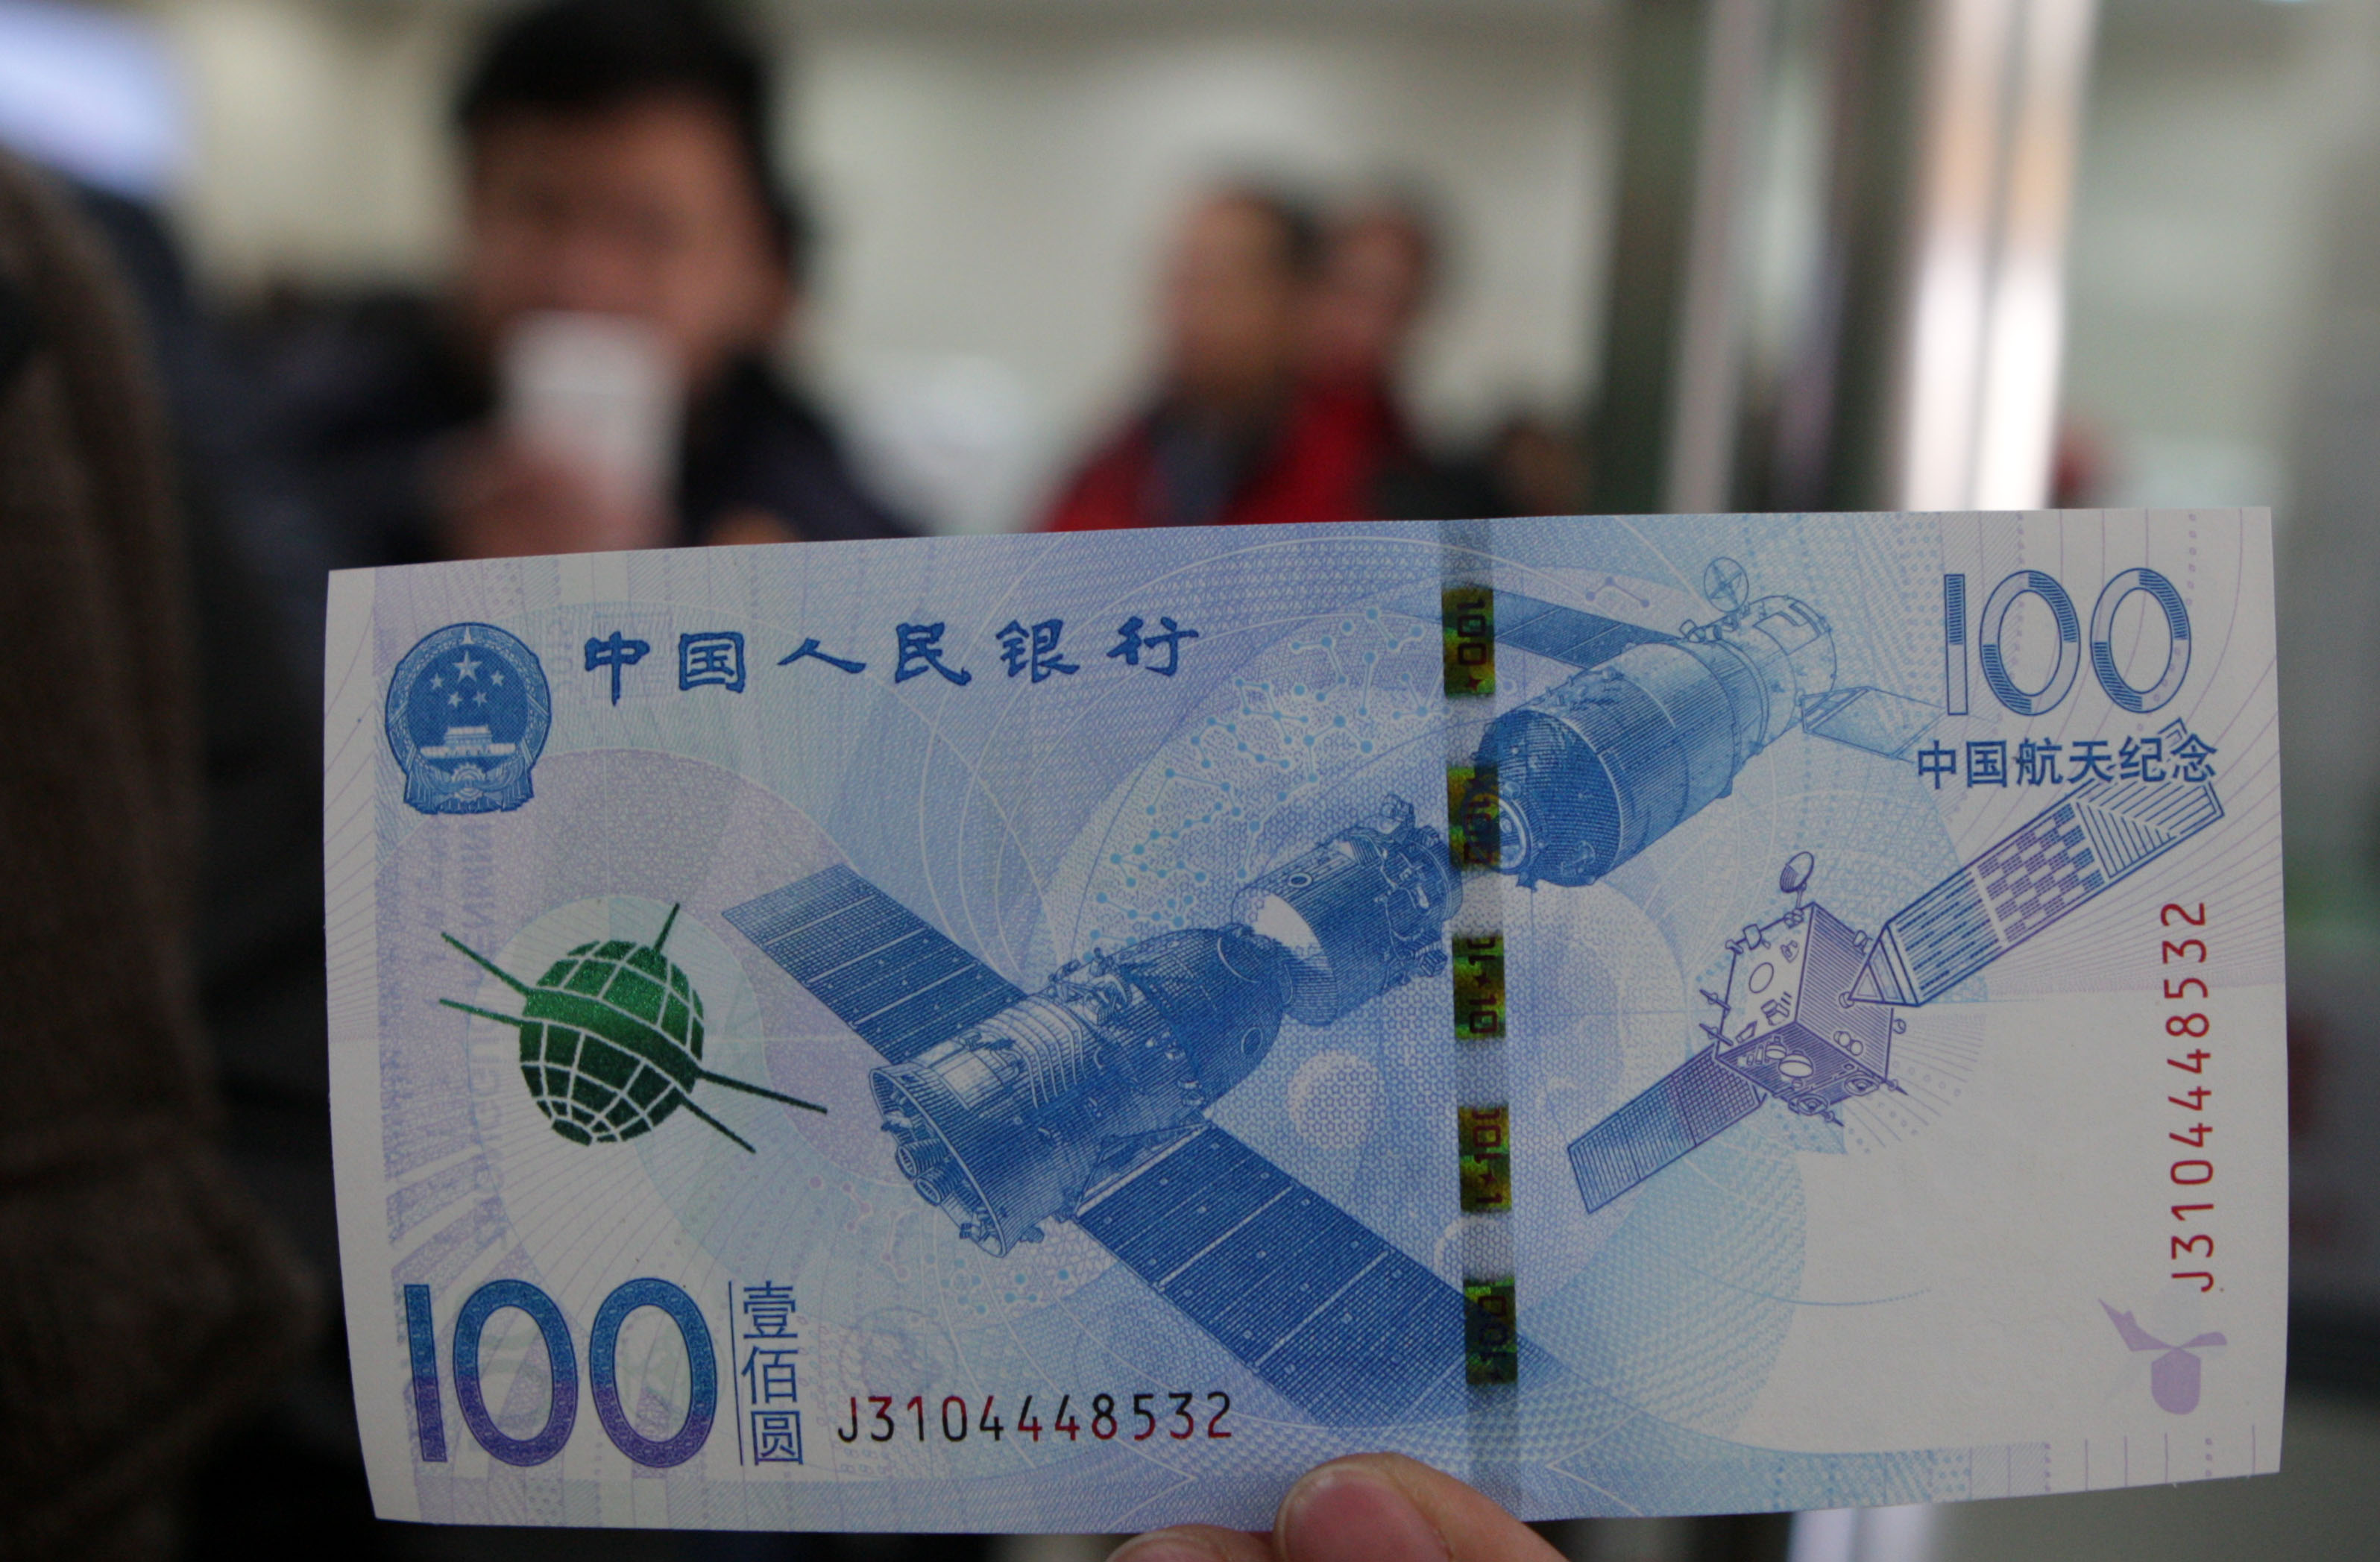 (151126) -- BEIJING, Nov. 26, 2015 (Xinhua) -- Photo taken on Nov. 26, 2015 shows a 100-yuan commemorative note at a bank in Beijing, capital of China. The People's Bank of China issued a commemorative bank note and coin on Nov. 26. The items, including a 100-yuan bank note and a 10-yuan coin, mark China's aerospace achievement over the past years. The commemorative note and coin will be circulated in the currency market with the same denomination as their equivalents. (Xinhua/Tao Ye) (lfj)